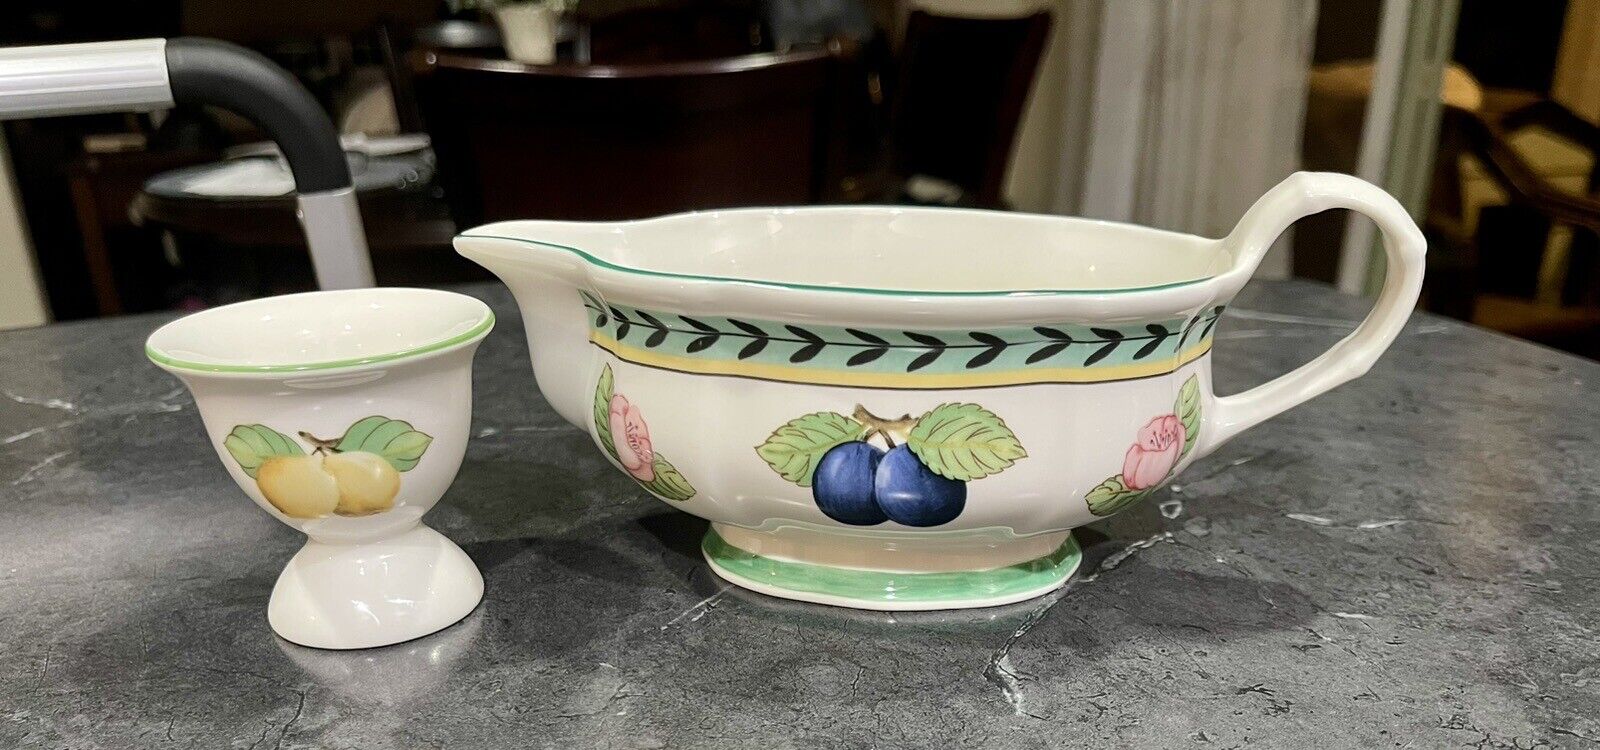 villeroy boch french garden Gravy Boat And Egg Cup